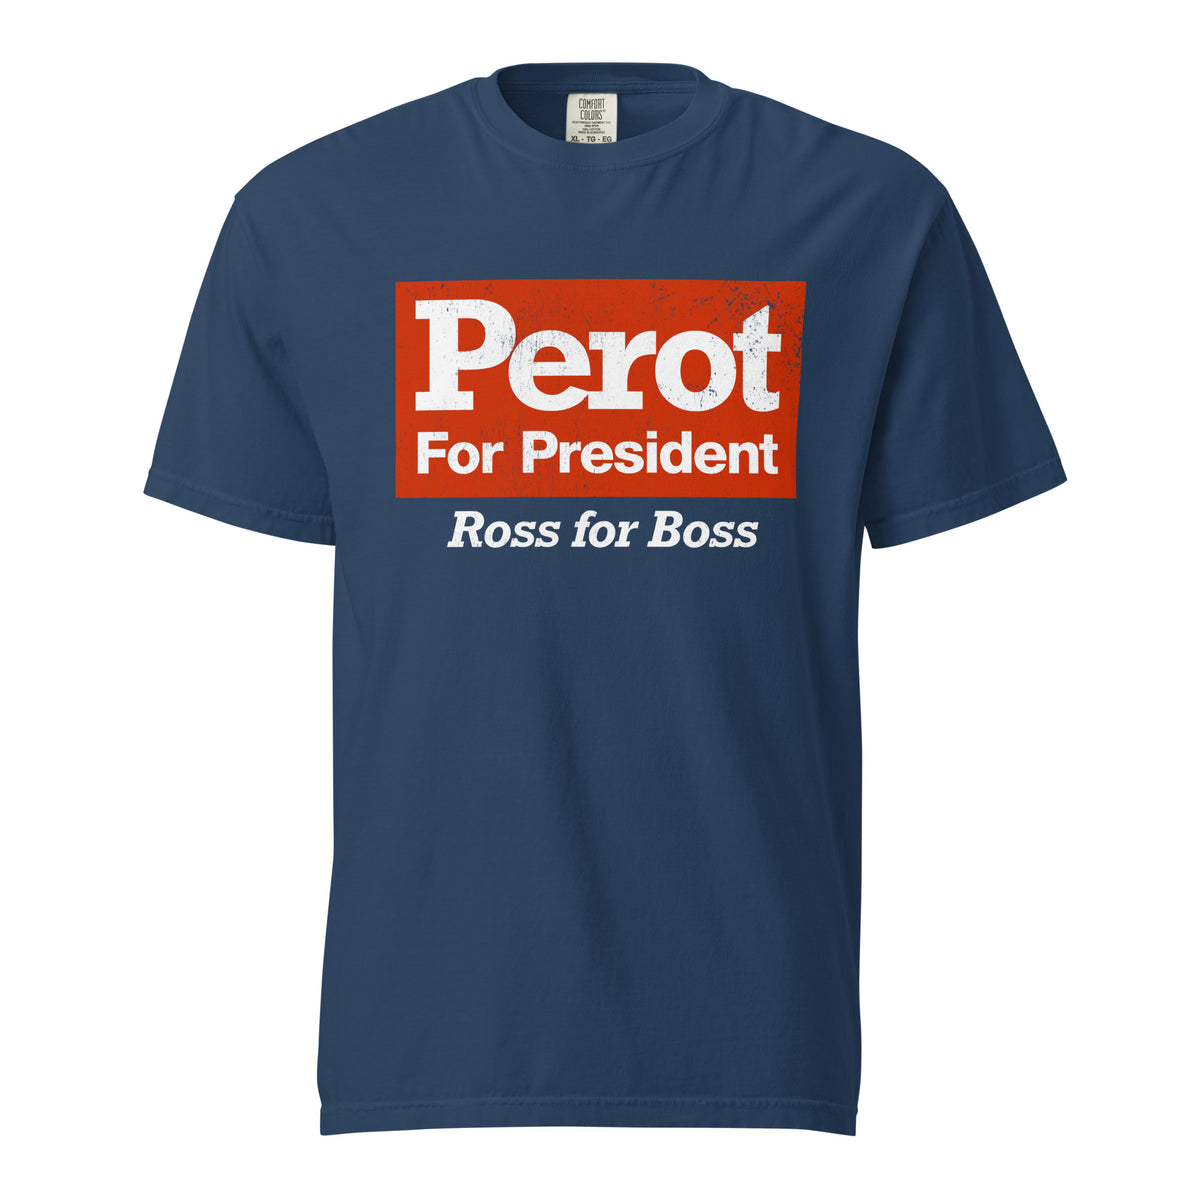 Ross Perot 1992 Campaign Reproduction Heavyweight Reproduction T-Shirt